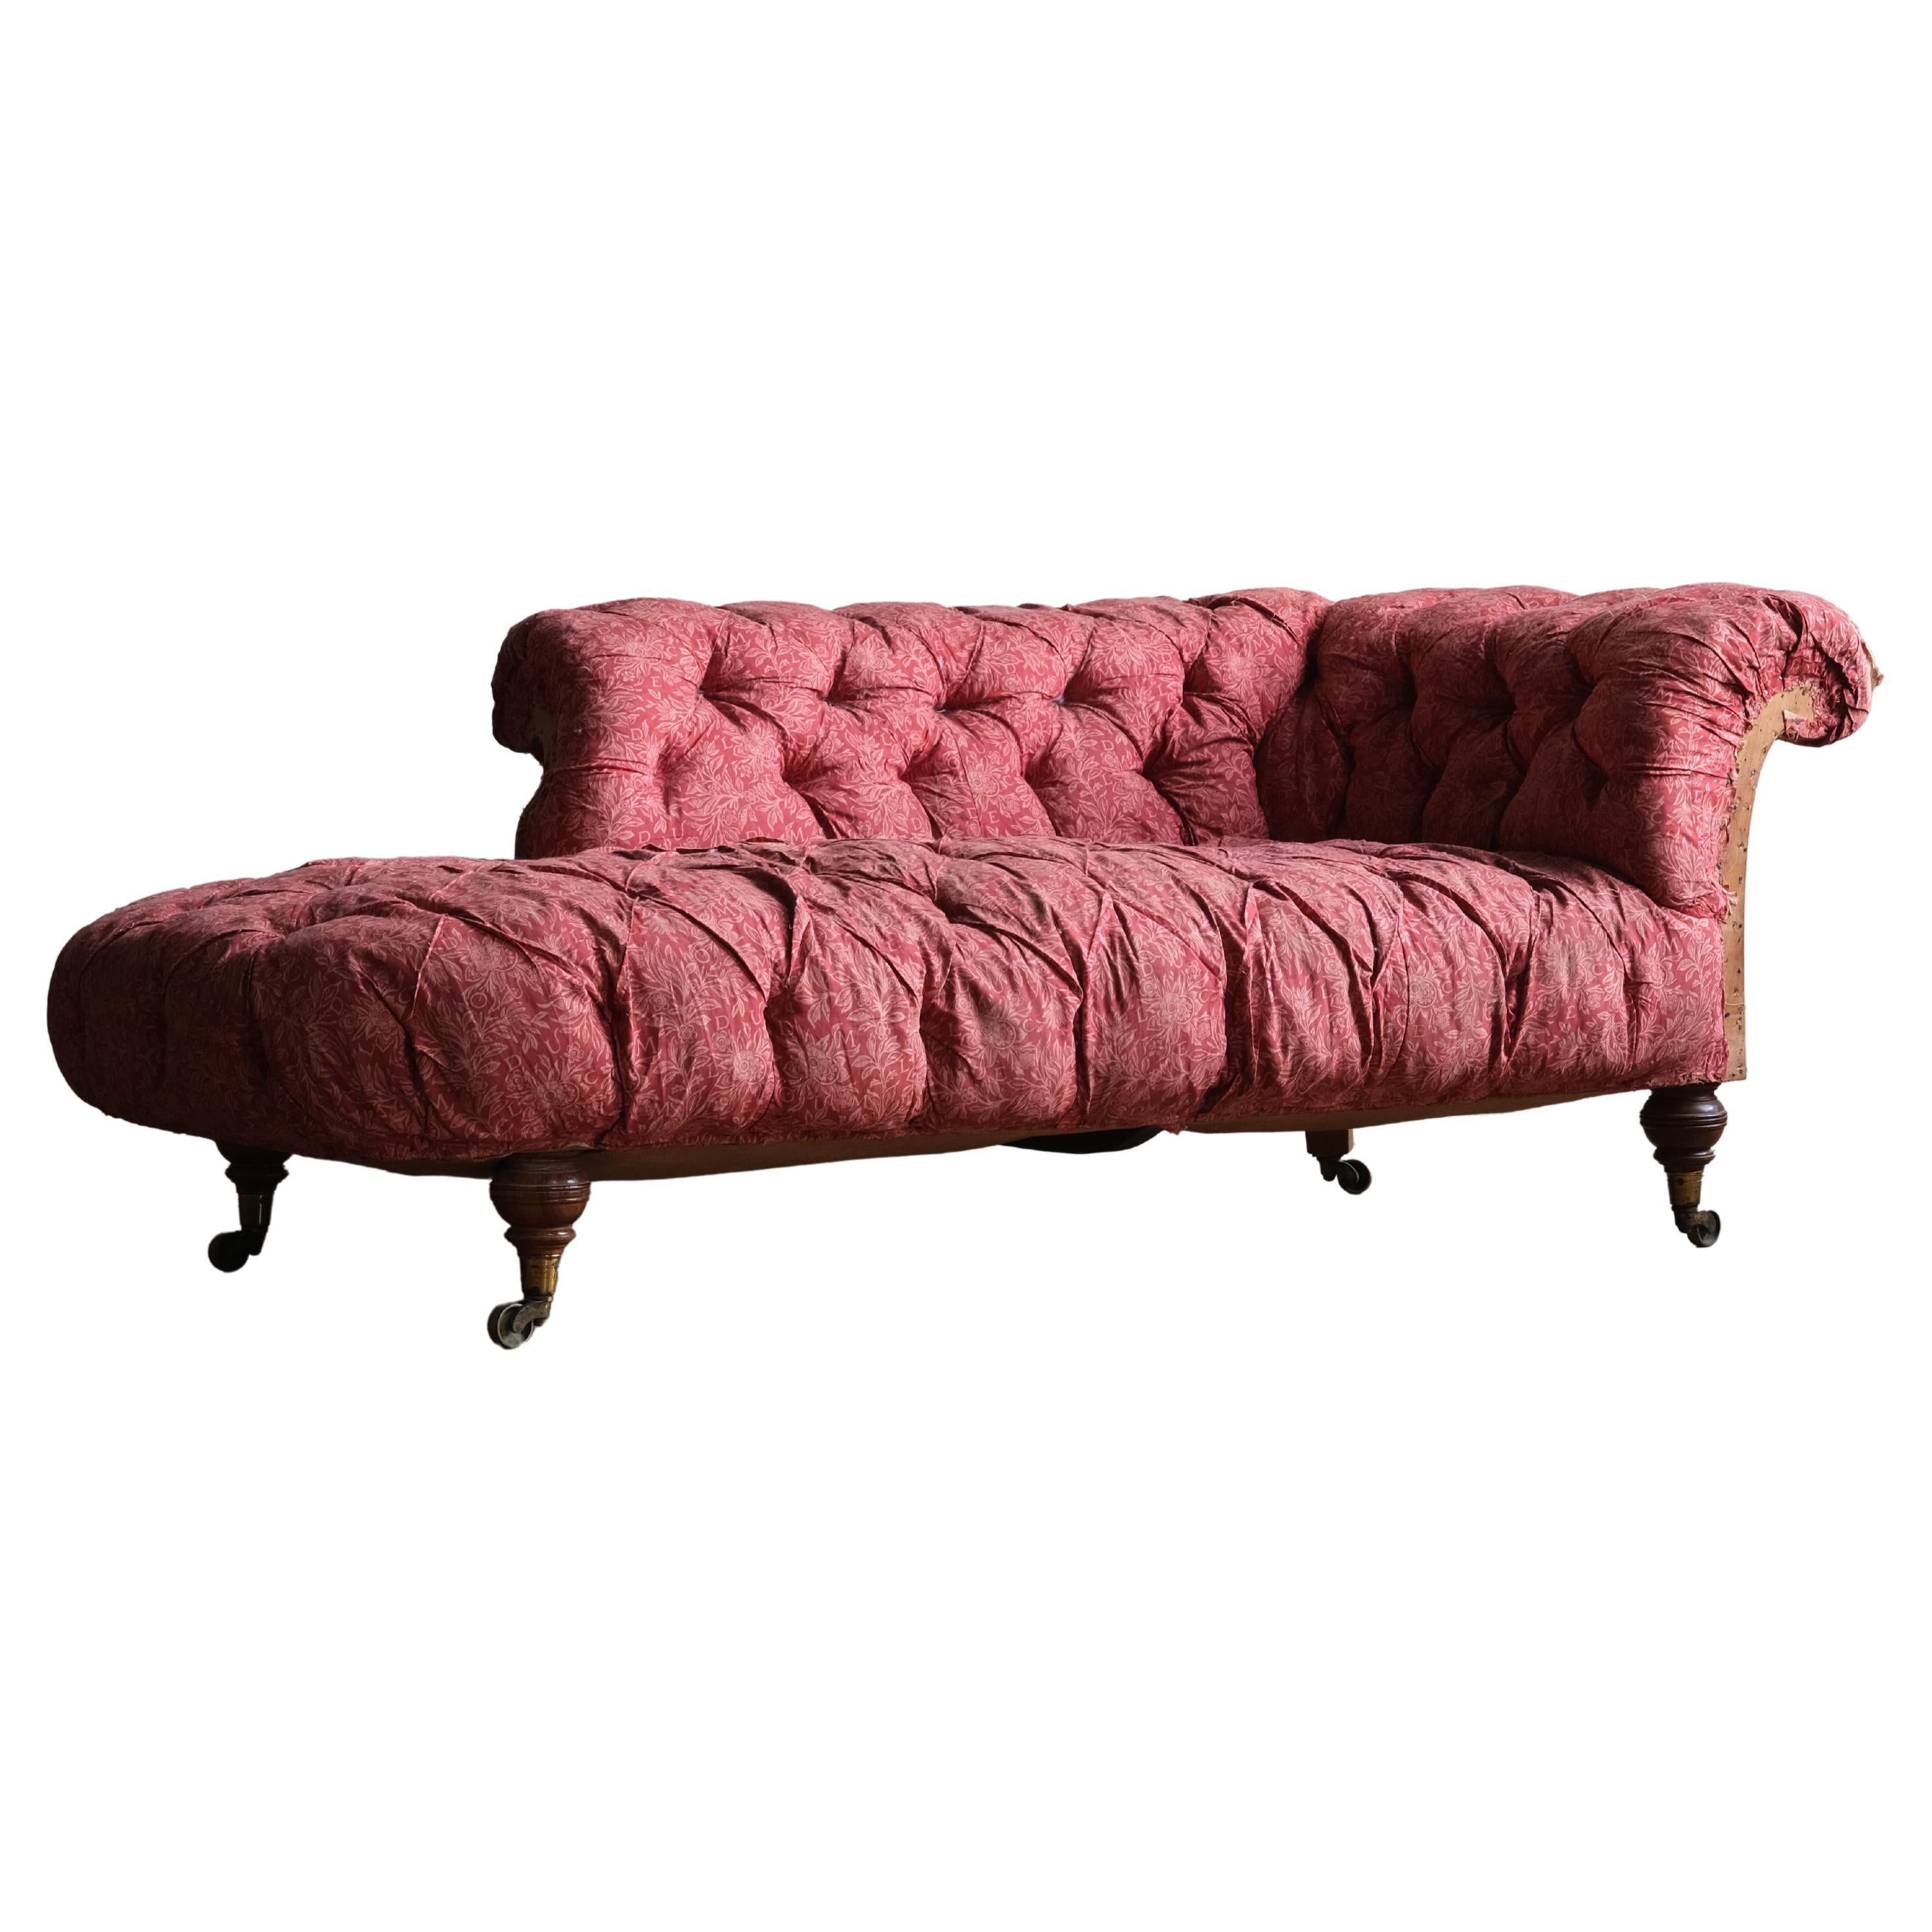 19th Century Howard and Sons Chesterfield Chaise Lounge For Sale at 1stDibs